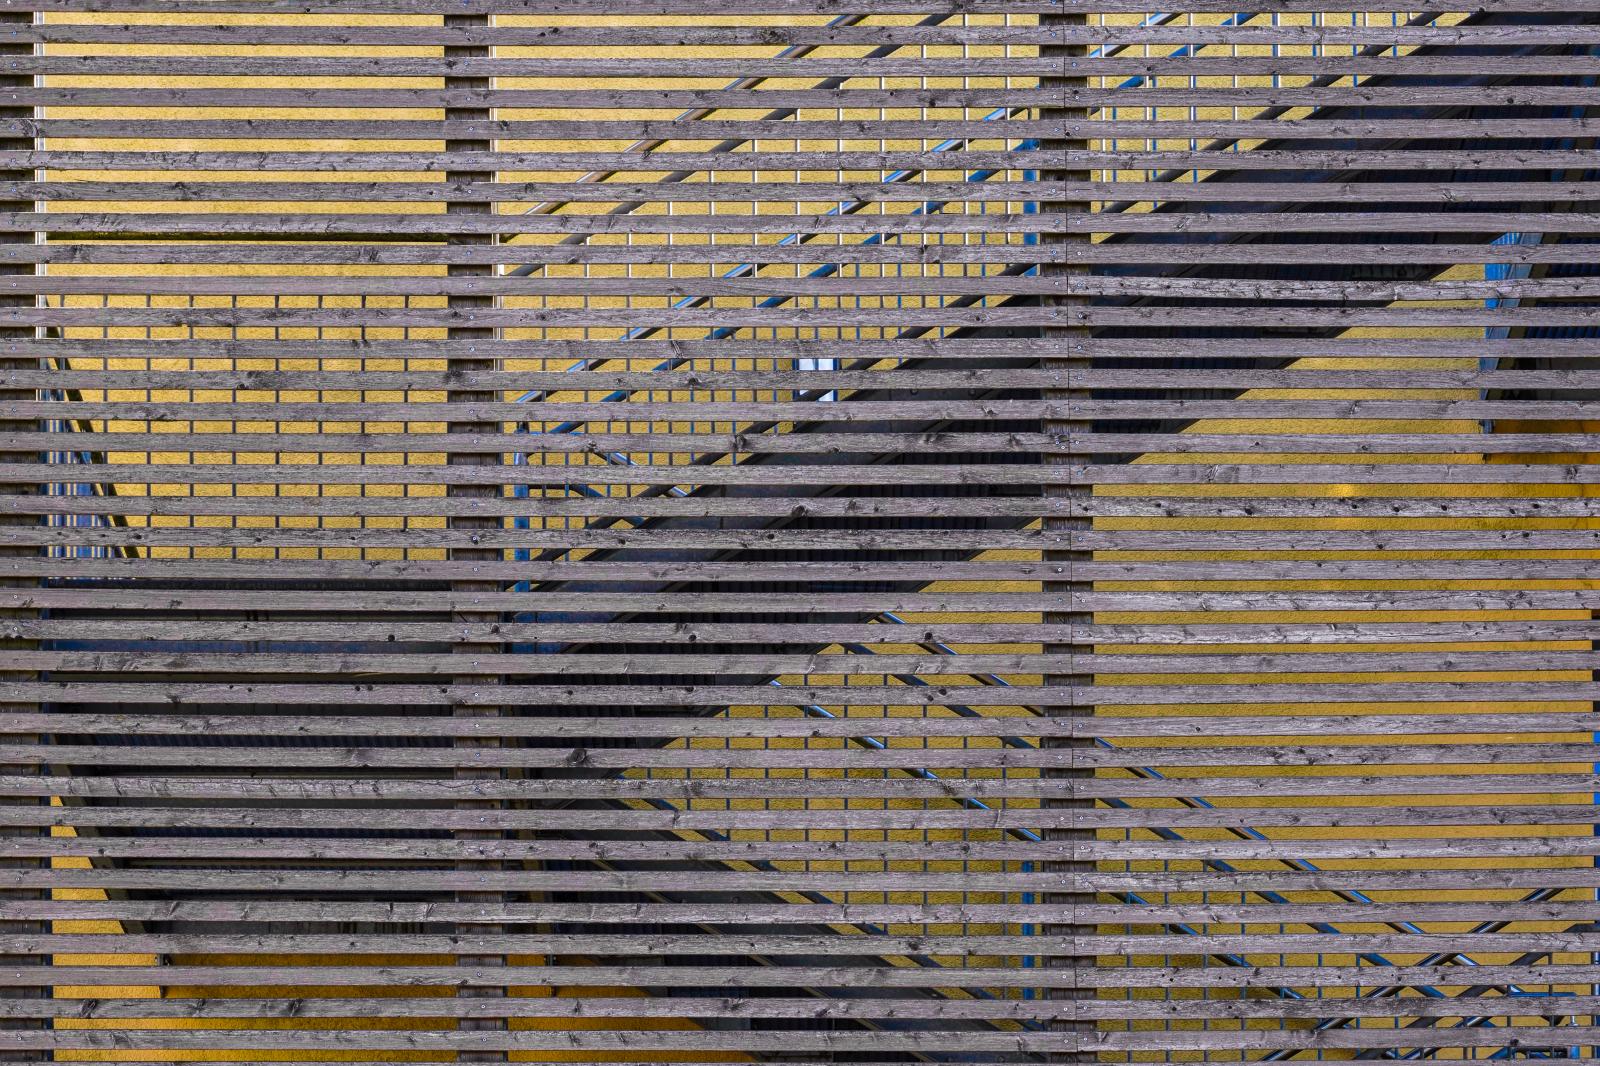 Staircase Serenade | Buy this image